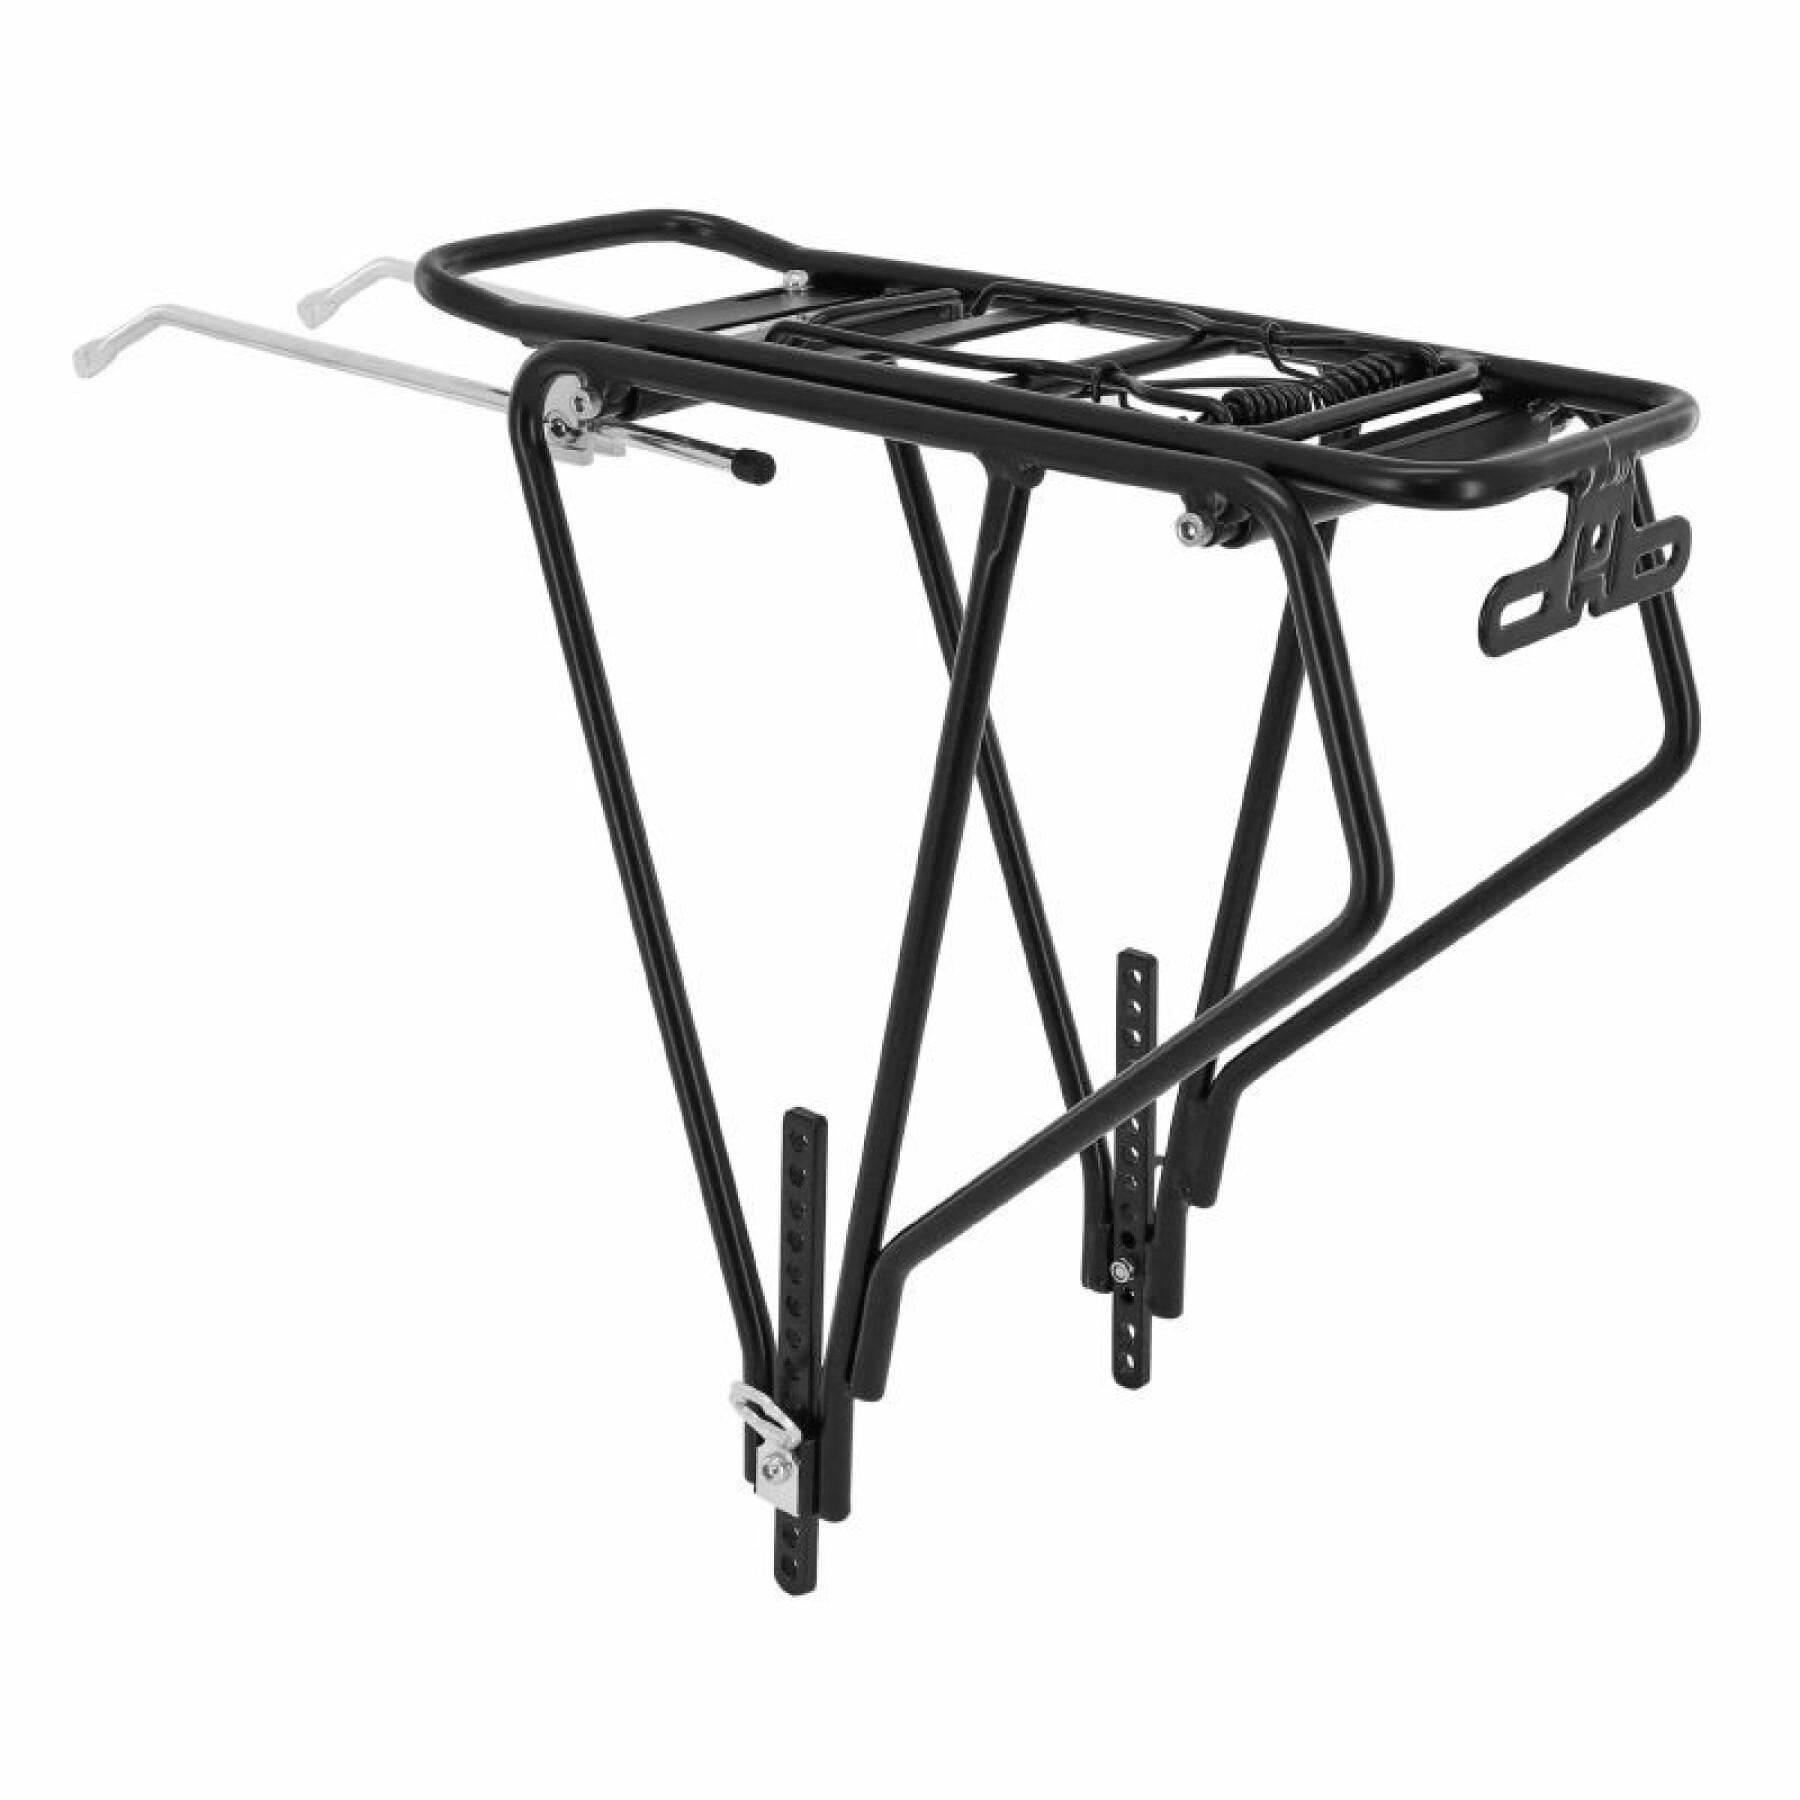 Rear bike carrier with aluminium rods adjustable width from 135 to 205 mm P2R Fat Bike